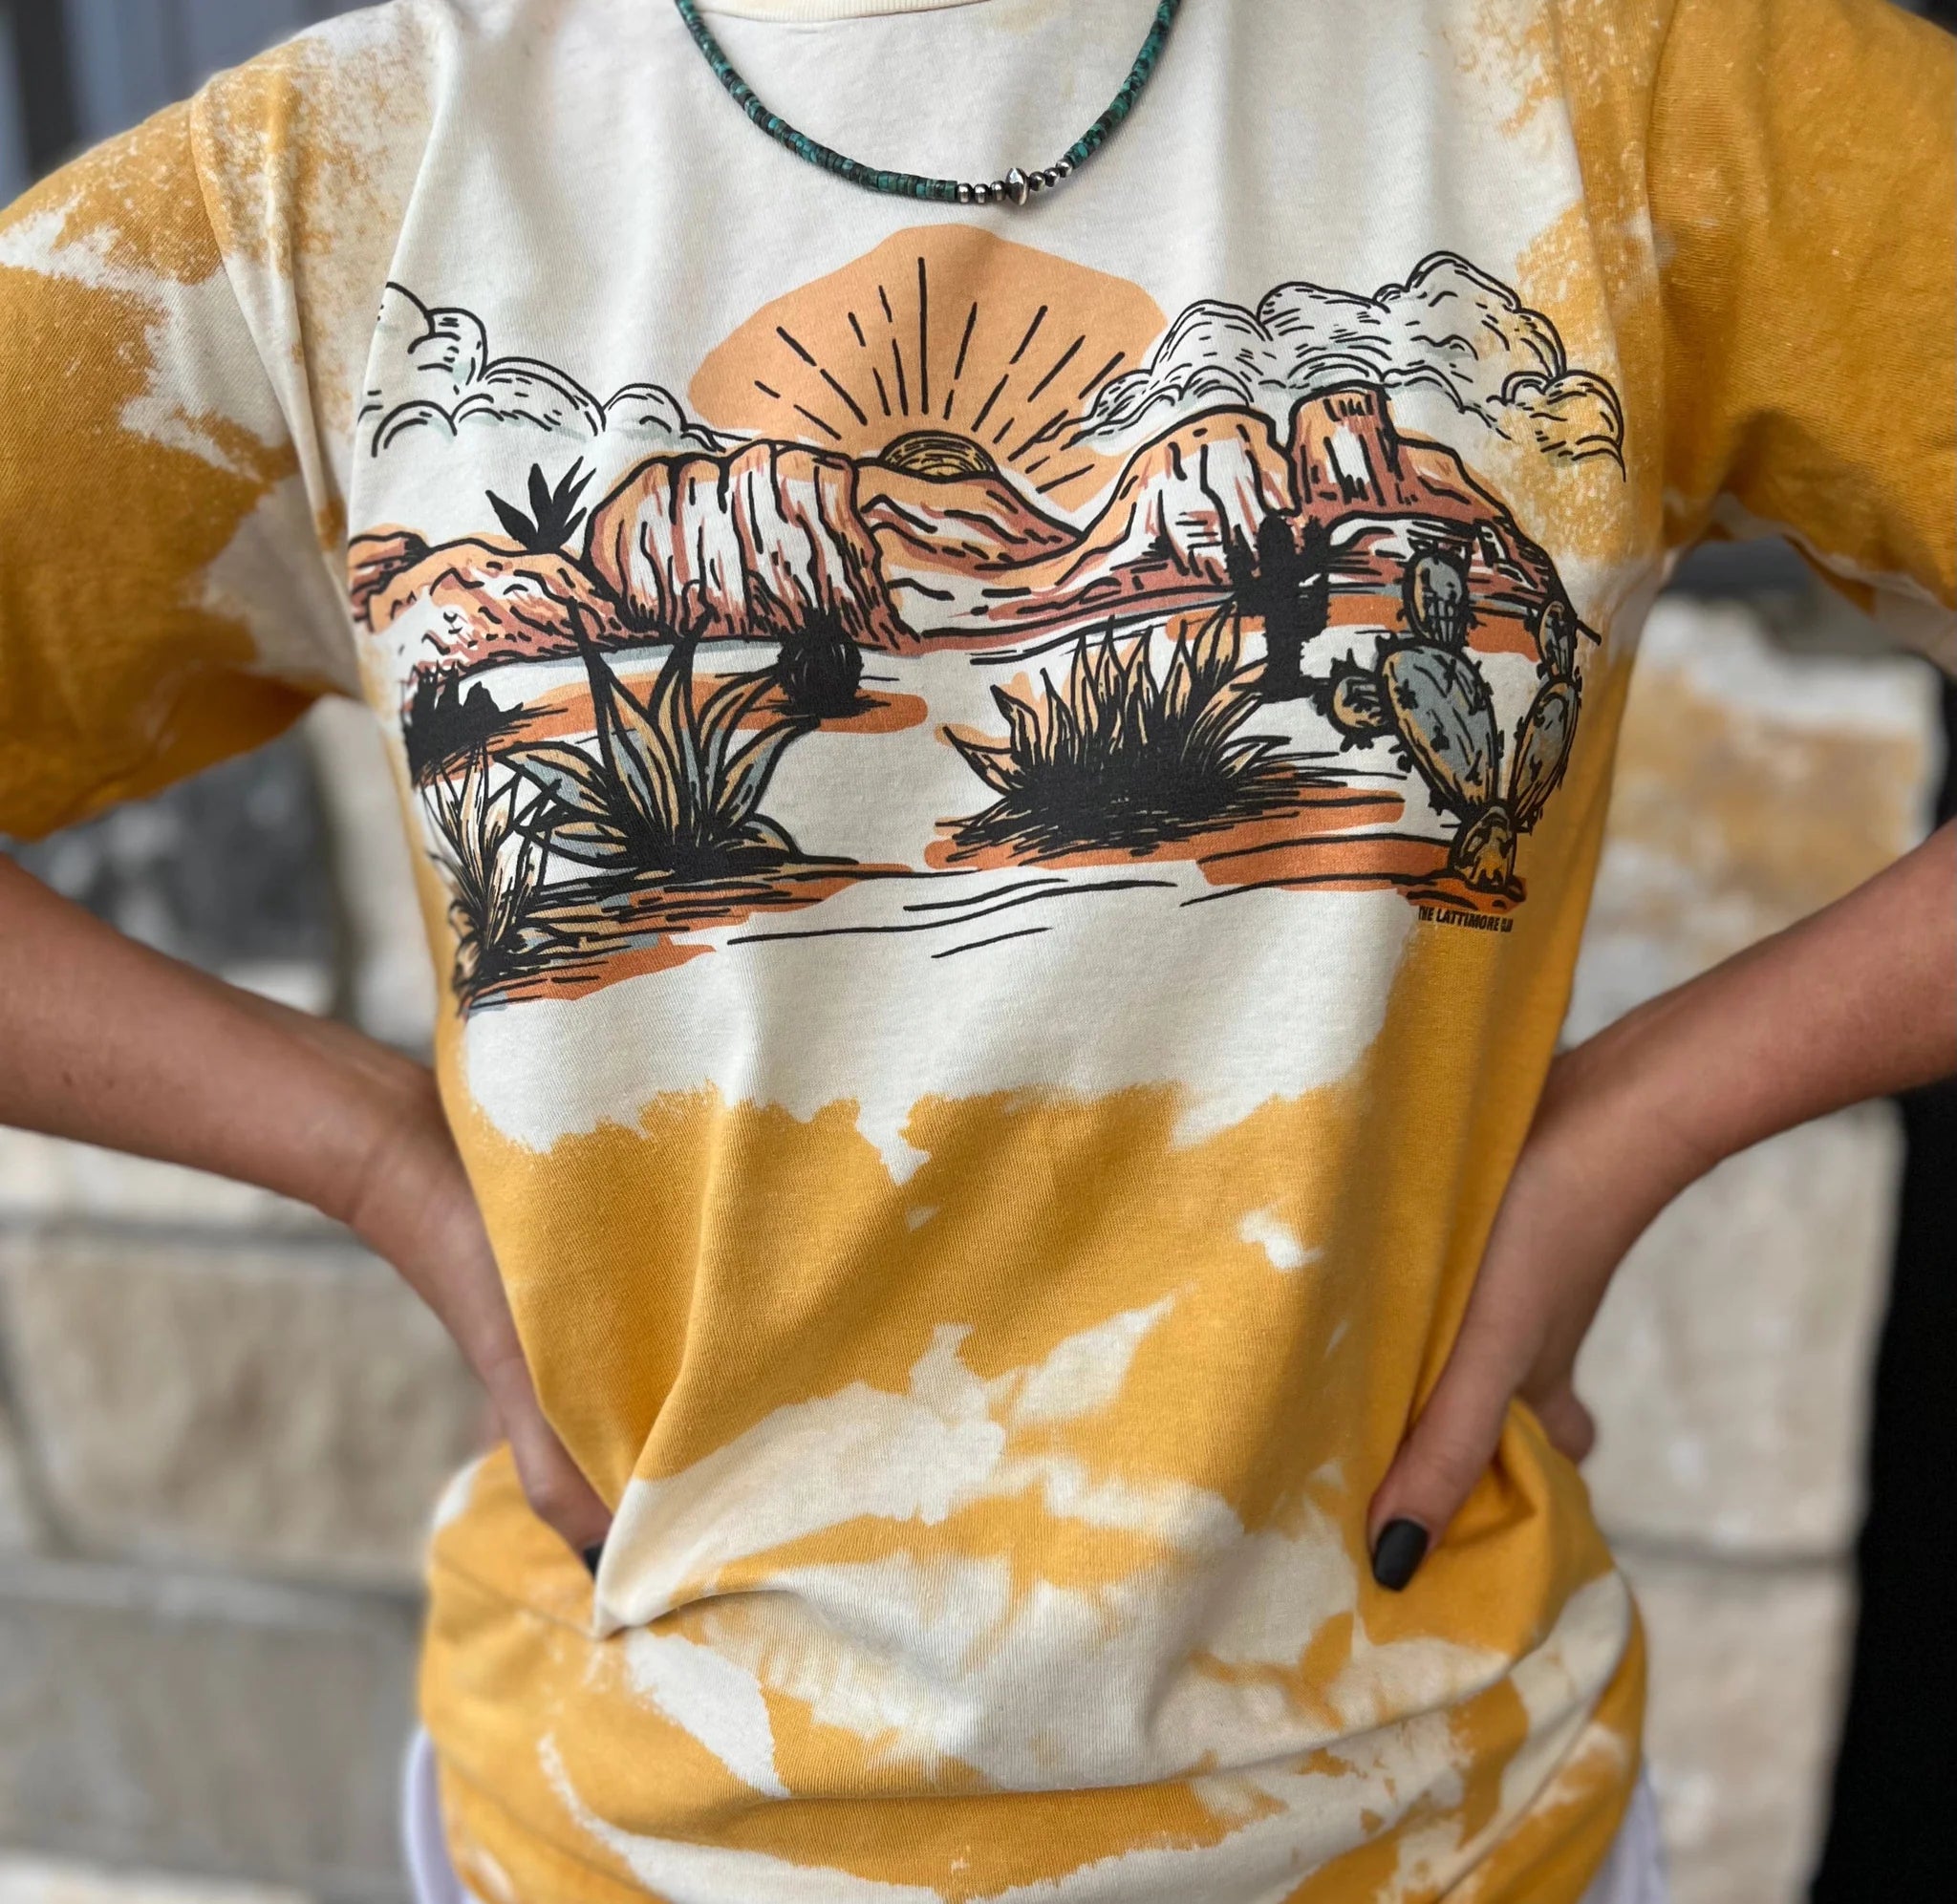 A bleached patterned mustard color short sleeve crewneck tee with a graphic in the center featuring cacti, desert flora, cliffs, and a sunset. Item is pictured on a light brick background